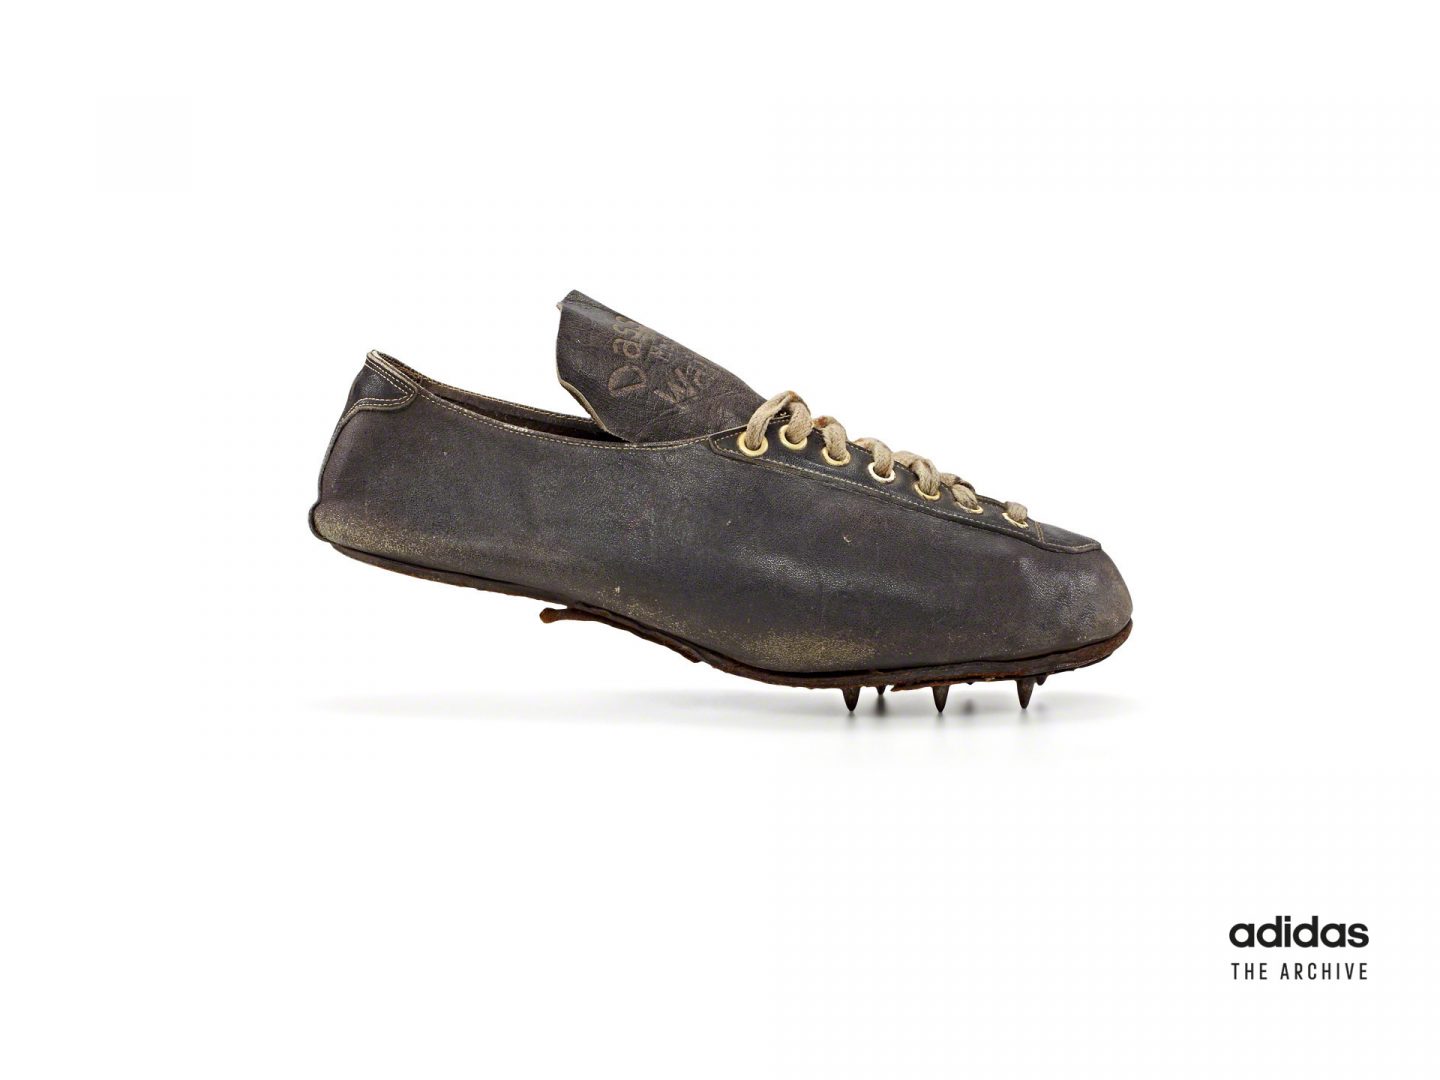 The original track spikes worn by Lina Radke as she won gold at the 1928 Olympics, now preserved in the adidas Archive. ©Studio Waldeck Photographers